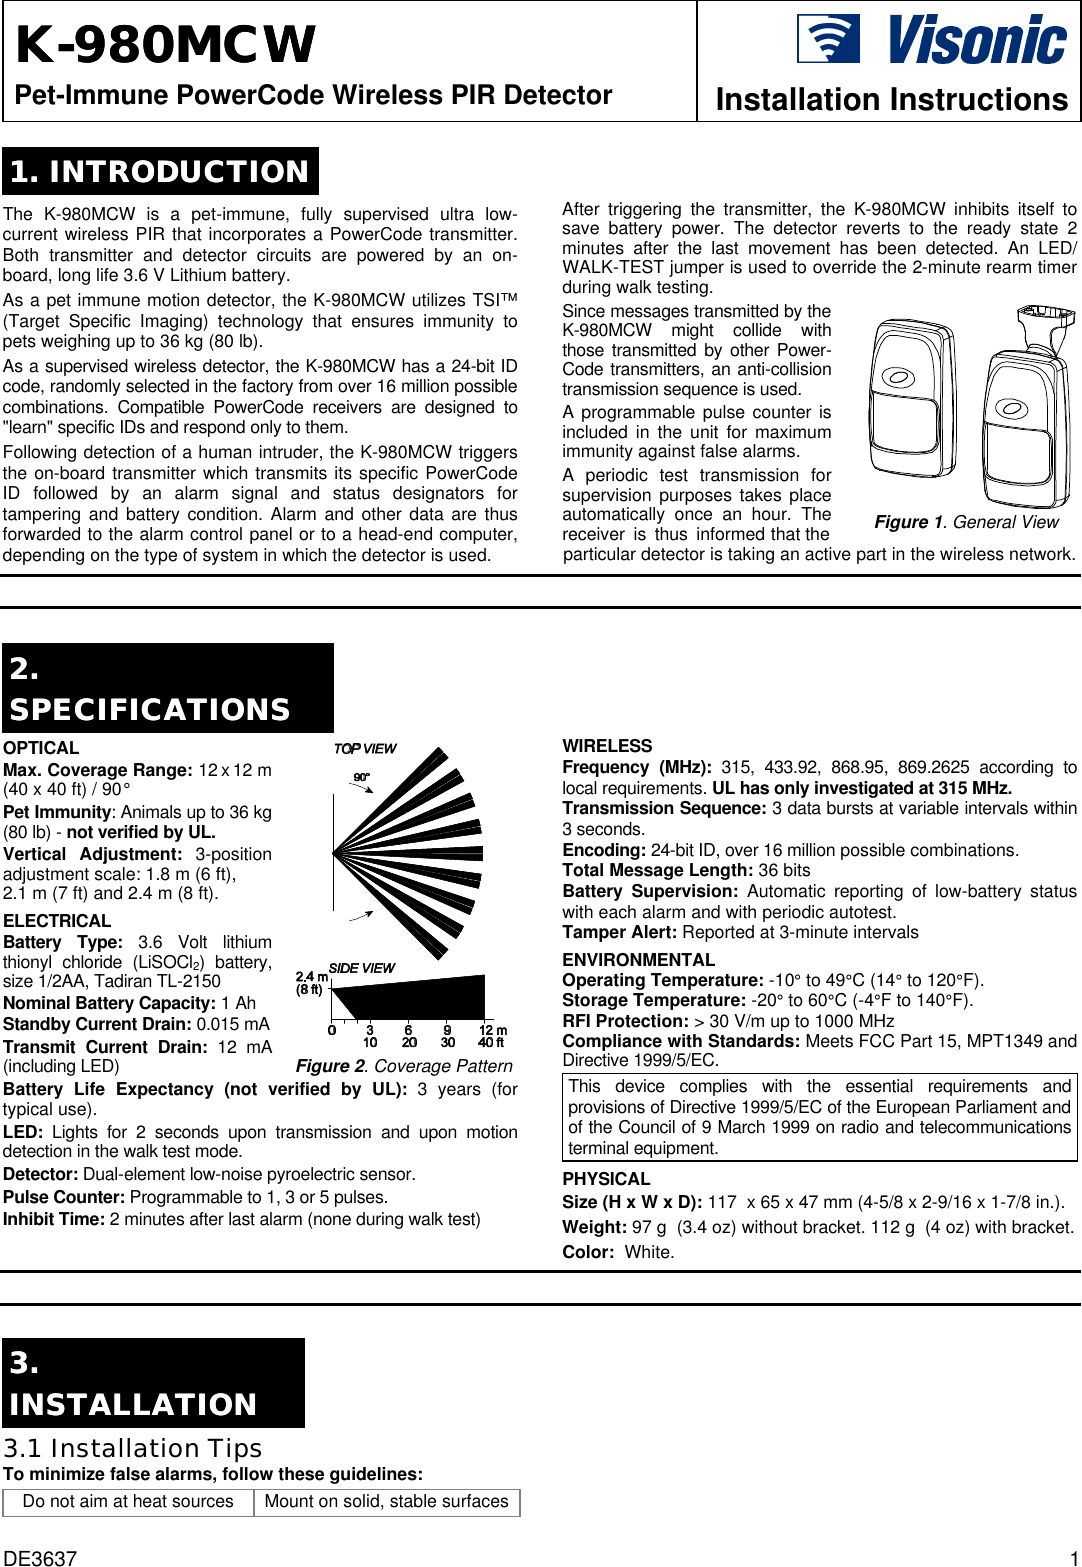 DE3637 1 KK--980MCW 980MCW   Pet-Immune PowerCode Wireless PIR Detector  Installation Instructions 1. INTRODUCTION1. INTRODUCTION  The K-980MCW is a pet-immune, fully supervised ultra low- current wireless PIR that incorporates a PowerCode transmitter. Both transmitter and detector circuits are powered by an on-board, long life 3.6 V Lithium battery. As a pet immune motion detector, the K-980MCW utilizes TSI™ (Target Specific Imaging) technology that ensures immunity to pets weighing up to 36 kg (80 lb).  As a supervised wireless detector, the K-980MCW has a 24-bit ID code, randomly selected in the factory from over 16 million possible combinations. Compatible PowerCode receivers are designed to &quot;learn&quot; specific IDs and respond only to them. Following detection of a human intruder, the K-980MCW triggers the on-board transmitter which transmits its specific PowerCode ID followed by an alarm signal and status designators for tampering and battery condition. Alarm and other data are thus forwarded to the alarm control panel or to a head-end computer, depending on the type of system in which the detector is used.  After triggering the transmitter, the K-980MCW inhibits itself to save battery power. The detector reverts to the ready state 2  minutes after the last movement has been detected. An LED/ WALK-TEST jumper is used to override the 2-minute rearm timer during walk testing. Since messages transmitted by the K-980MCW might collide with those transmitted by other Power- Code transmitters, an anti-collision transmission sequence is used. A programmable pulse counter is included in the unit for maximum immunity against false alarms. A periodic test transmission for supervision purposes takes place automatically once an hour. The receiver is thus informed that the   Figure 1. General View particular detector is taking an active part in the wireless network.   2. 2. SPECIFICATIONSSPECIFICATIONS  OPTICAL  Max. Coverage Range: 12 x 12 m (40 x 40 ft) / 90° Pet Immunity: Animals up to 36 kg (80 lb) - not verified by UL. Vertical Adjustment: 3-position adjustment scale: 1.8 m (6 ft),  2.1 m (7 ft) and 2.4 m (8 ft). ELECTRICAL  Battery Type: 3.6 Volt lithium thionyl chloride (LiSOCl2) battery, size 1/2AA, Tadiran TL-2150 Nominal Battery Capacity: 1 Ah Standby Current Drain: 0.015 mA Transmit Current Drain: 12 mA (including LED)  Figure 2. Coverage Pattern Battery Life Expectancy (not verified by UL): 3 years (for typical use). LED:  Lights for 2 seconds upon transmission and upon motion detection in the walk test mode. Detector: Dual-element low-noise pyroelectric sensor.  Pulse Counter: Programmable to 1, 3 or 5 pulses. Inhibit Time: 2 minutes after last alarm (none during walk test)  WIRELESS Frequency (MHz): 315, 433.92, 868.95, 869.2625 according to local requirements. UL has only investigated at 315 MHz. Transmission Sequence: 3 data bursts at variable intervals within 3 seconds. Encoding: 24-bit ID, over 16 million possible combinations. Total Message Length: 36 bits Battery Supervision: Automatic reporting of low-battery status with each alarm and with periodic autotest. Tamper Alert: Reported at 3-minute intervals ENVIRONMENTAL Operating Temperature: -10° to 49°C (14° to 120°F).  Storage Temperature: -20° to 60°C (-4°F to 140°F).  RFI Protection: &gt; 30 V/m up to 1000 MHz Compliance with Standards: Meets FCC Part 15, MPT1349 and Directive 1999/5/EC. This device complies with the essential requirements and provisions of Directive 1999/5/EC of the European Parliament and of the Council of 9 March 1999 on radio and telecommunications terminal equipment. PHYSICAL  Size (H x W x D): 117  x 65 x 47 mm (4-5/8 x 2-9/16 x 1-7/8 in.). Weight: 97 g  (3.4 oz) without bracket. 112 g  (4 oz) with bracket. Color:  White.   3. 3. INSTALLATIONINSTALLATION  3.1 Installation Tips  To minimize false alarms, follow these guidelines: Do not aim at heat sources Mount on solid, stable surfaces  